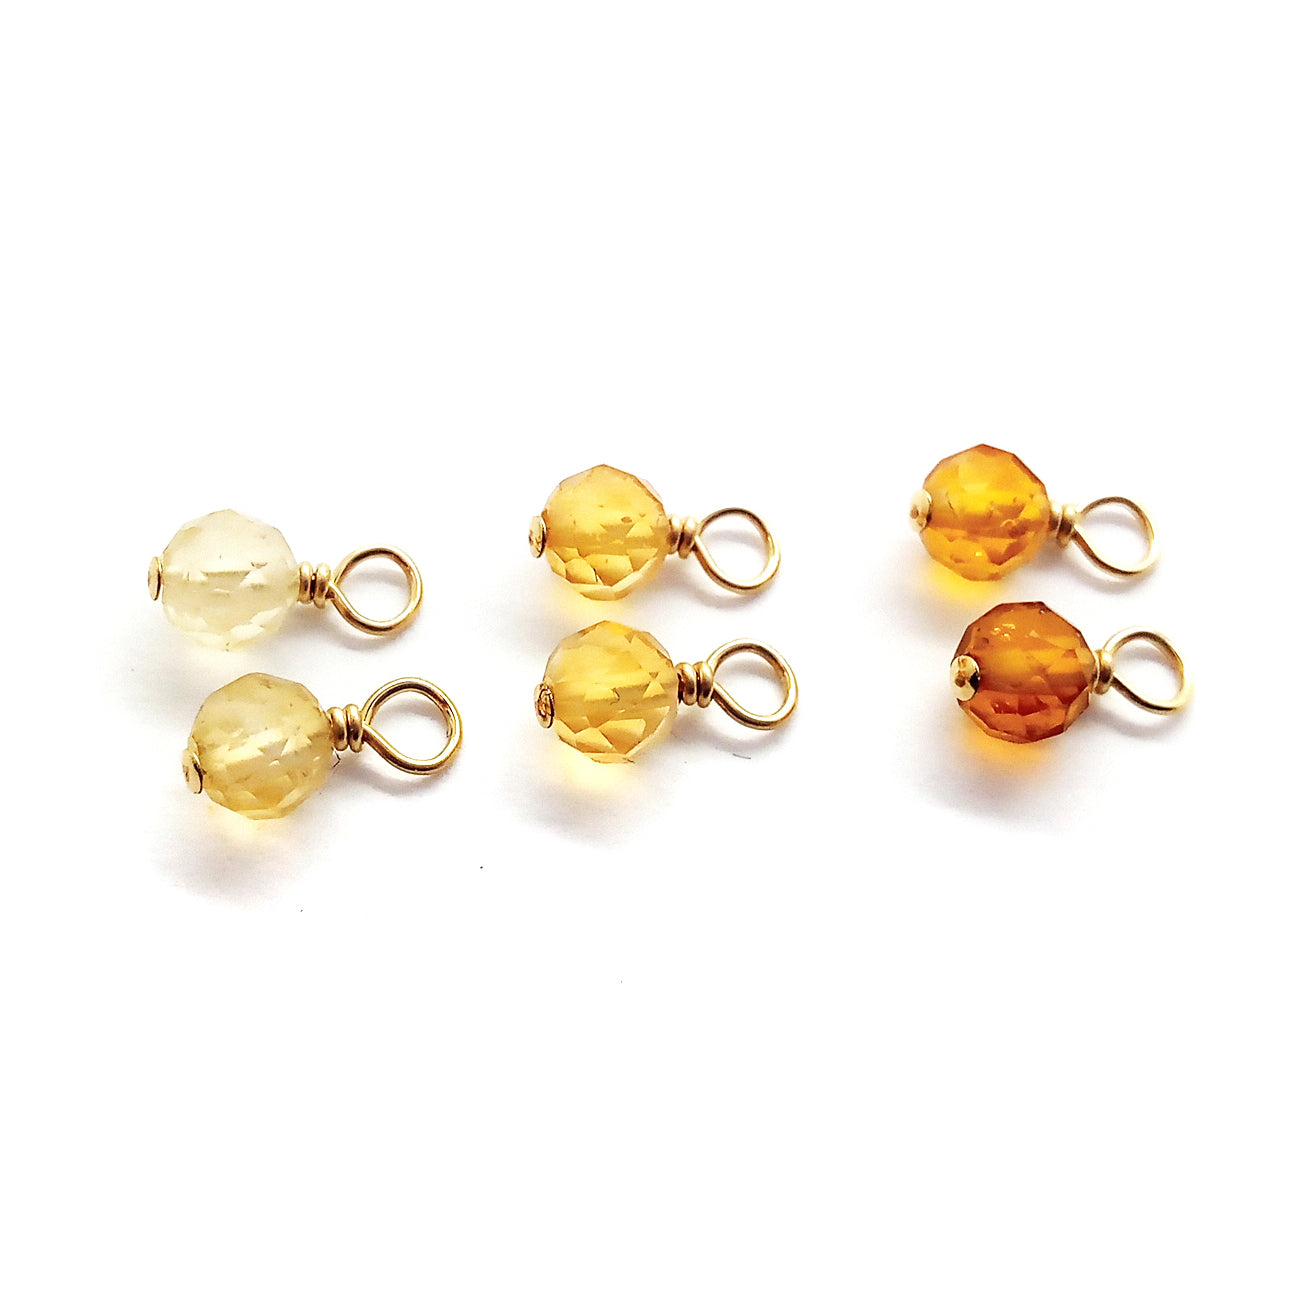 Citrine gemstone bead charms are tiny 4mm dangles for June birthstone jewelry, in shades of light yellow to orange.